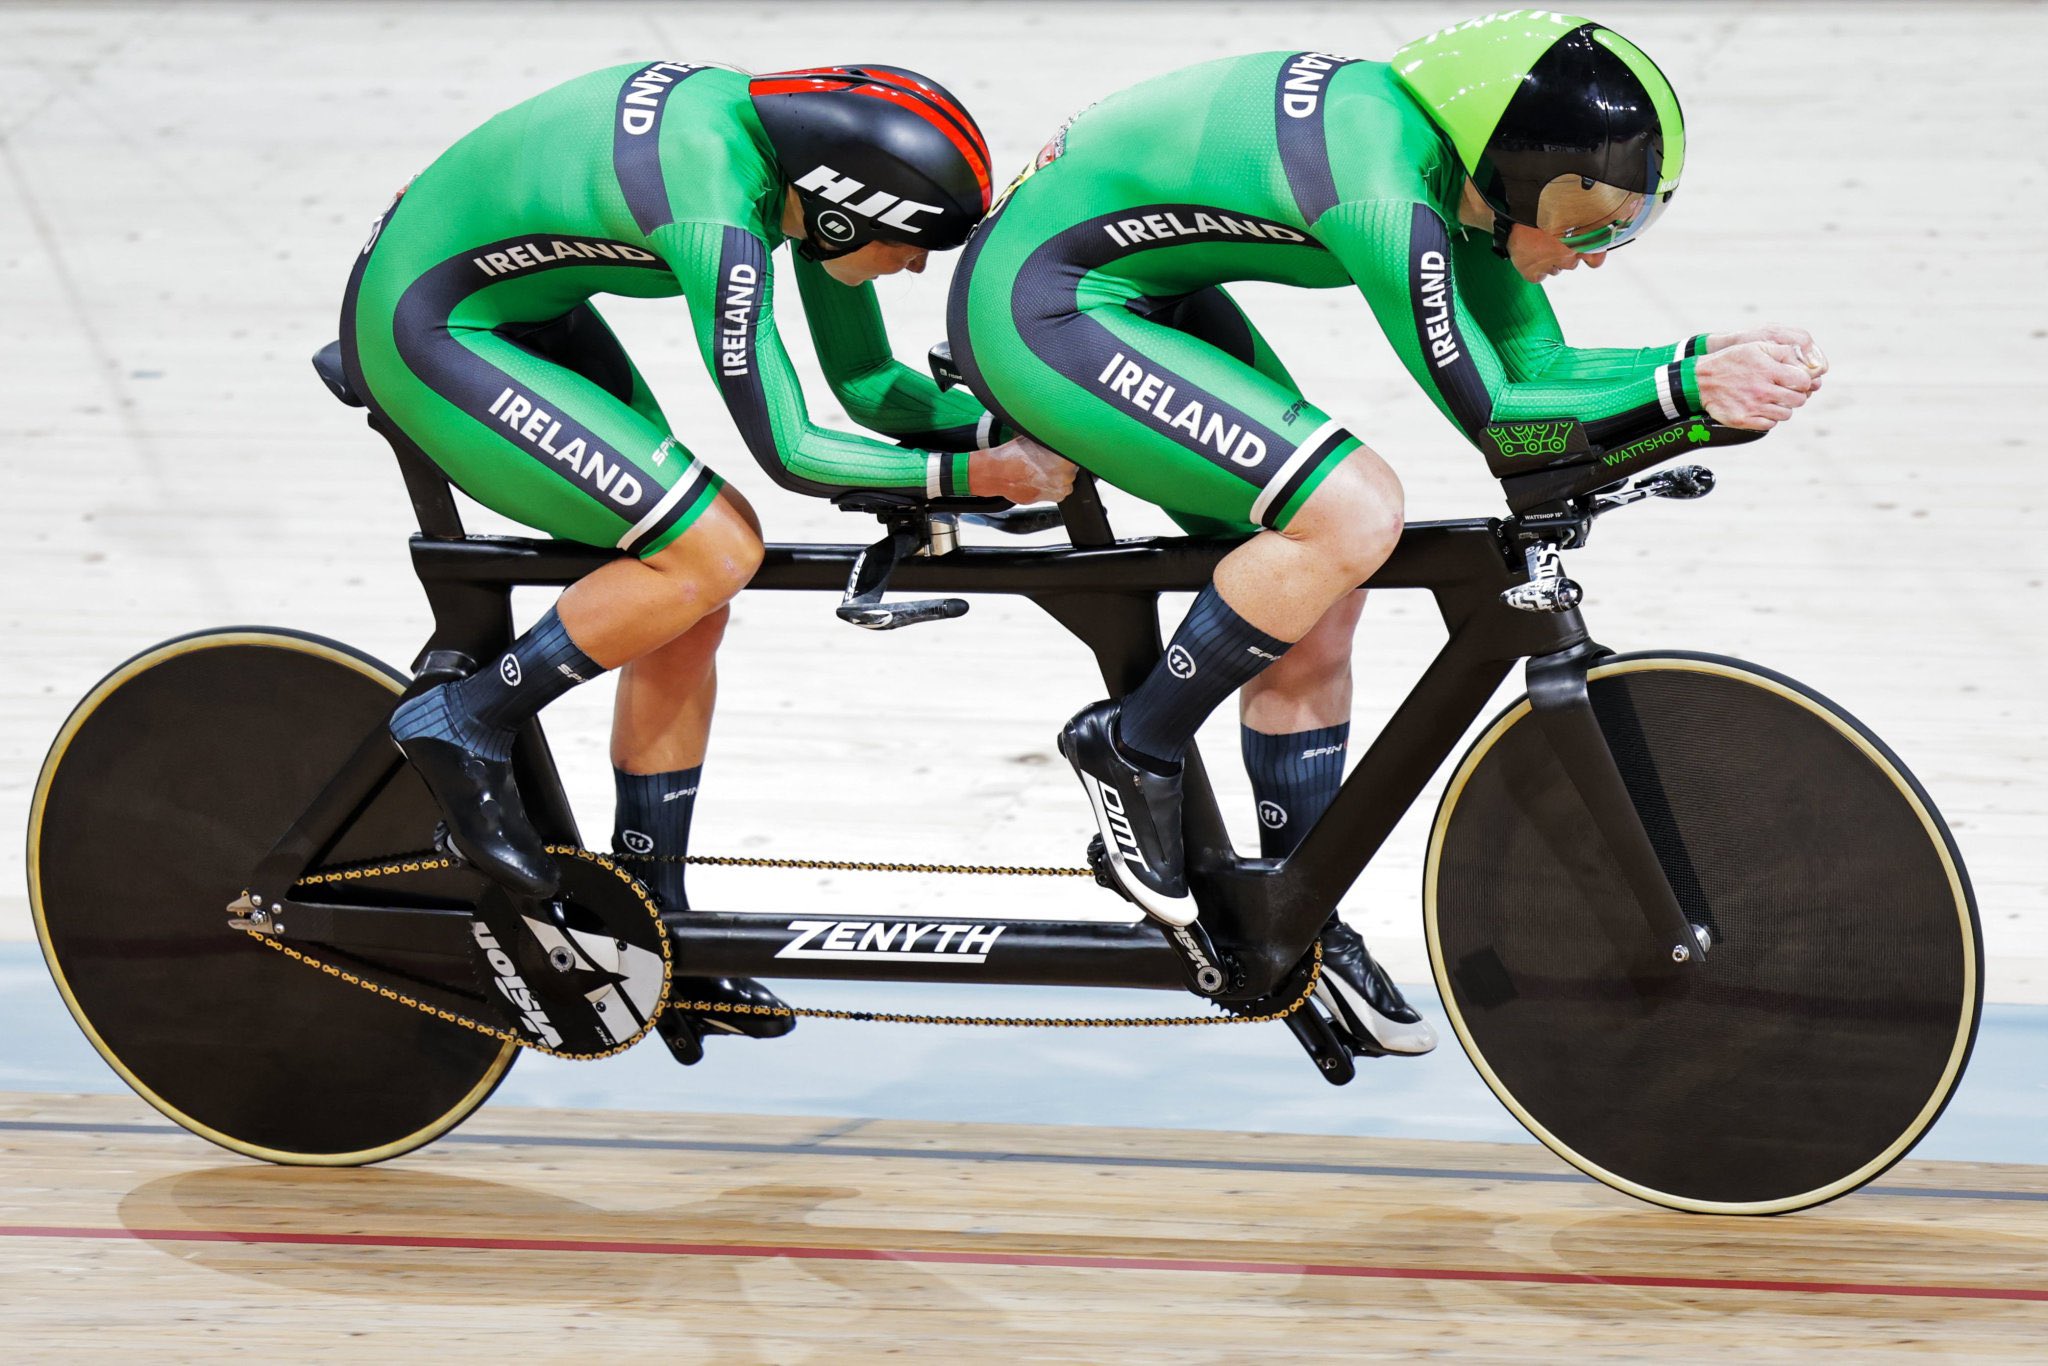 Dunlevy and McCrystal go close to another medal at Paracycling track worlds